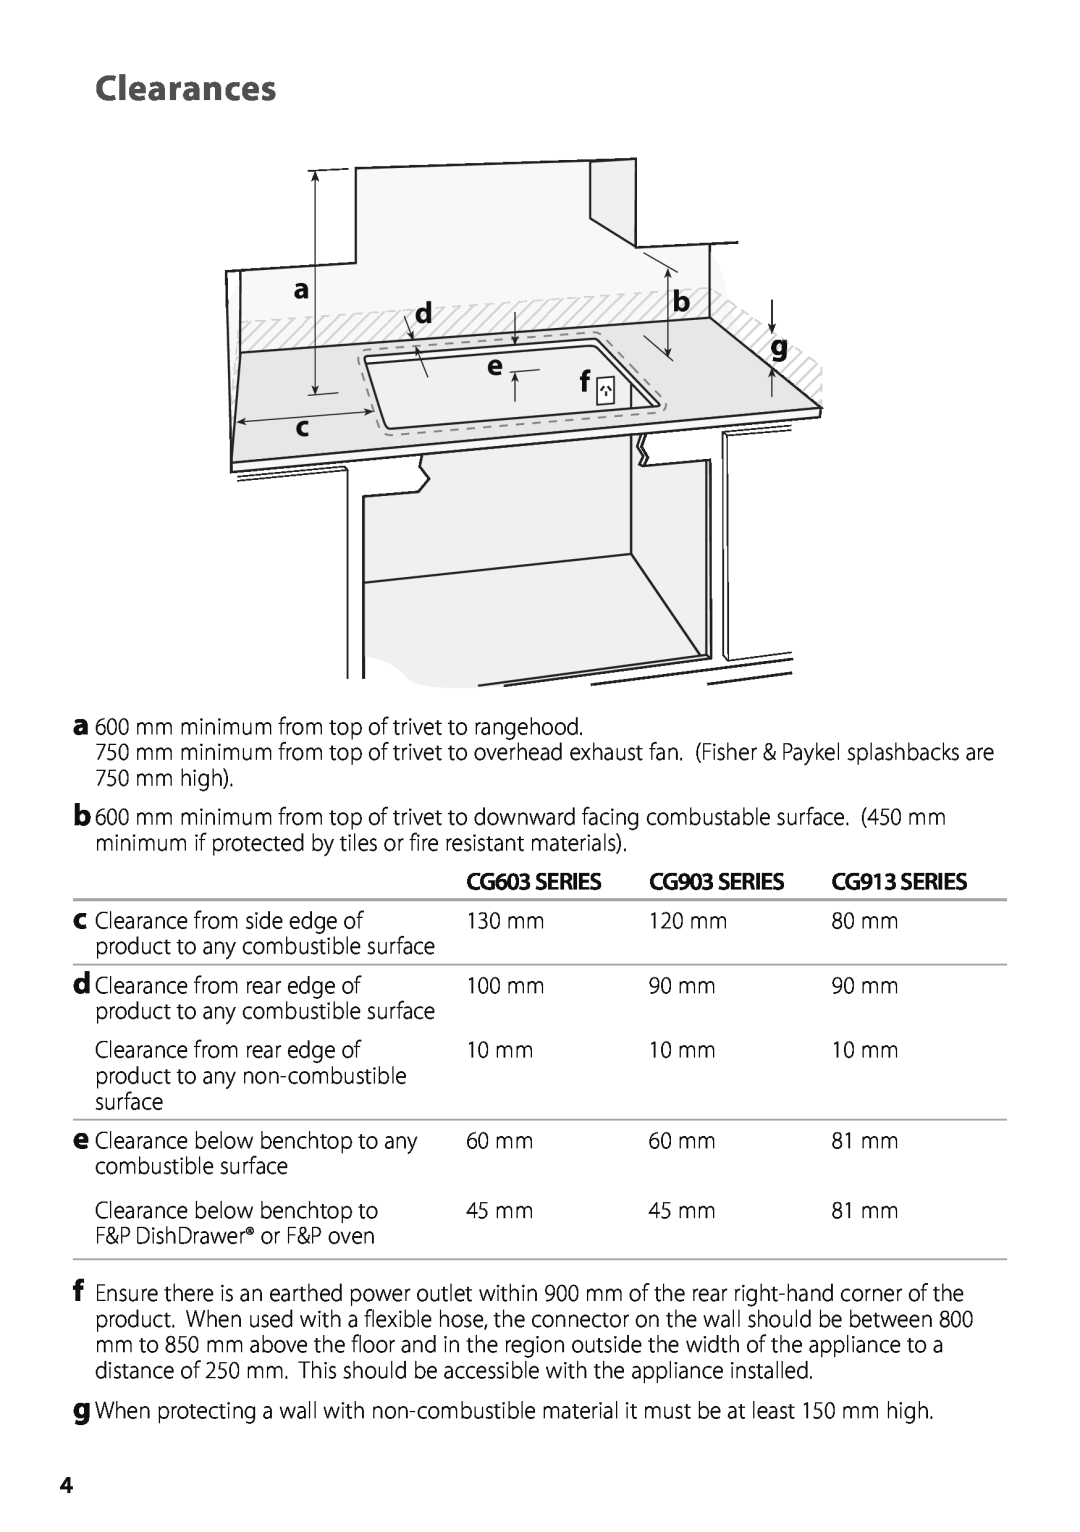 Fisher & Paykel installation instructions Clearances, CG603 SERIES, CG903 SERIES, CG913 SERIES 